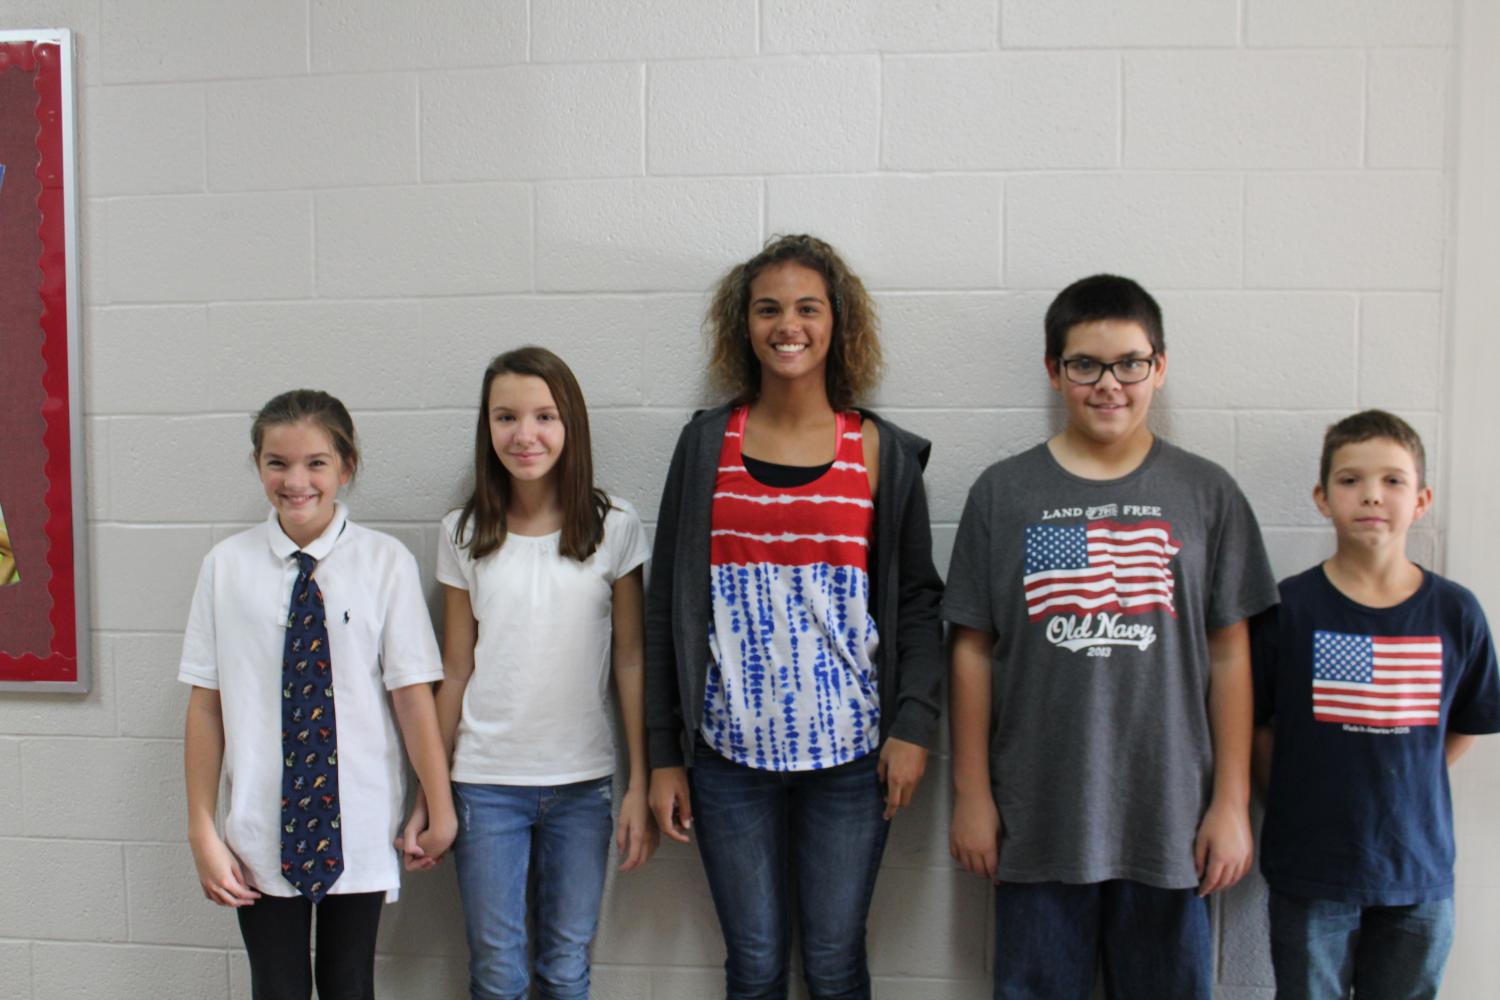 Sixth-grade students Ainsley McEntire, Patience Eichler, Jaedyn Harvey, Morgan Elliot and Travis Fowler show off their gear for Americna Dad Monday.